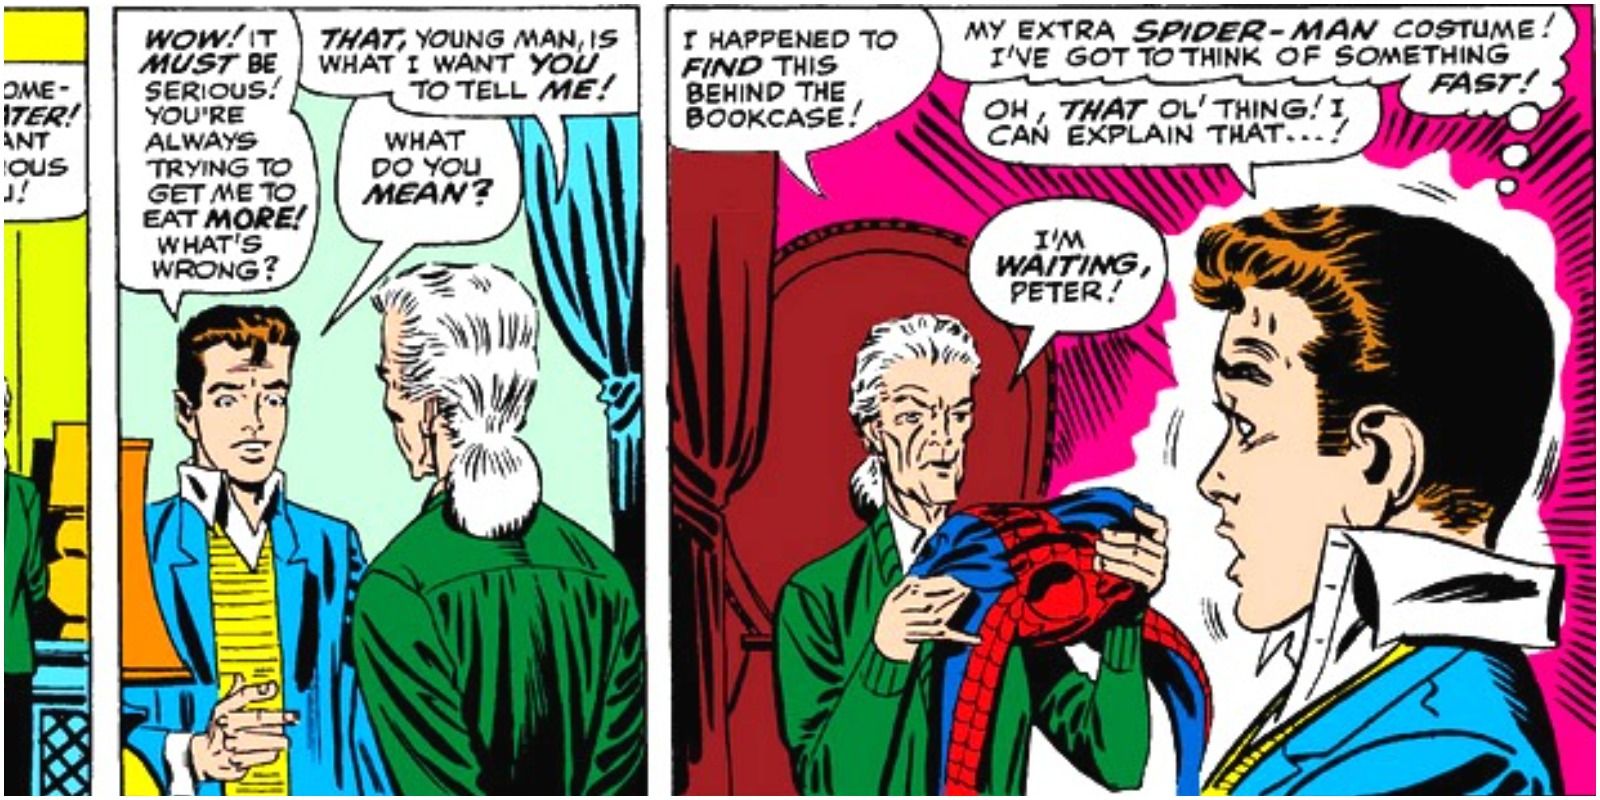 Aunt May finding Peter's Spider-Man Costume